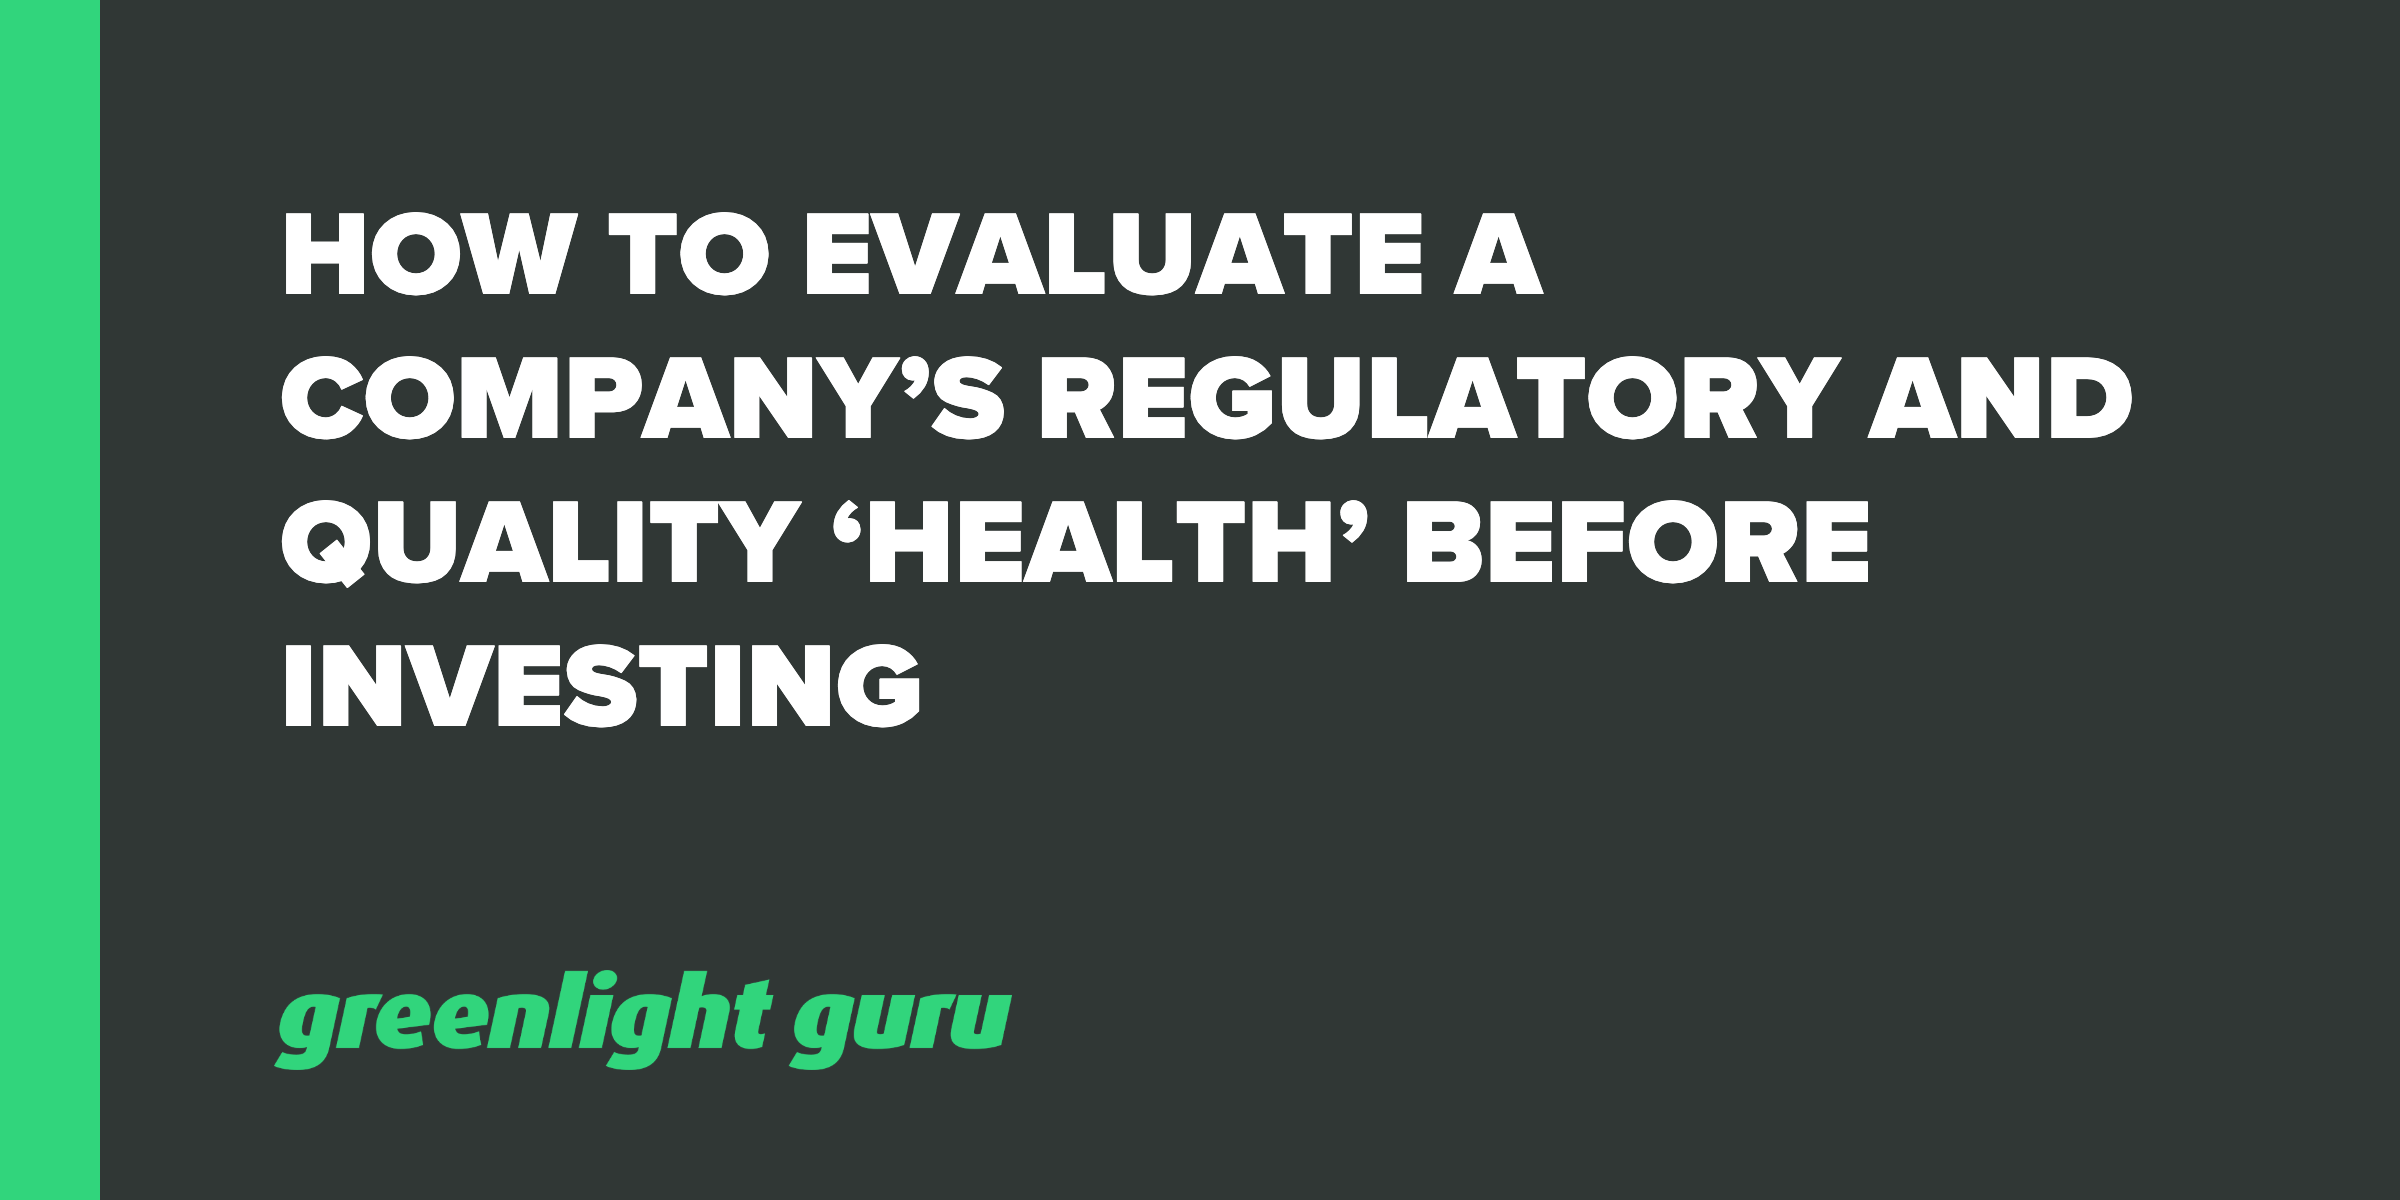 How To Evaluate A Company’s Regulatory And Quality ‘Health’ Before Investing